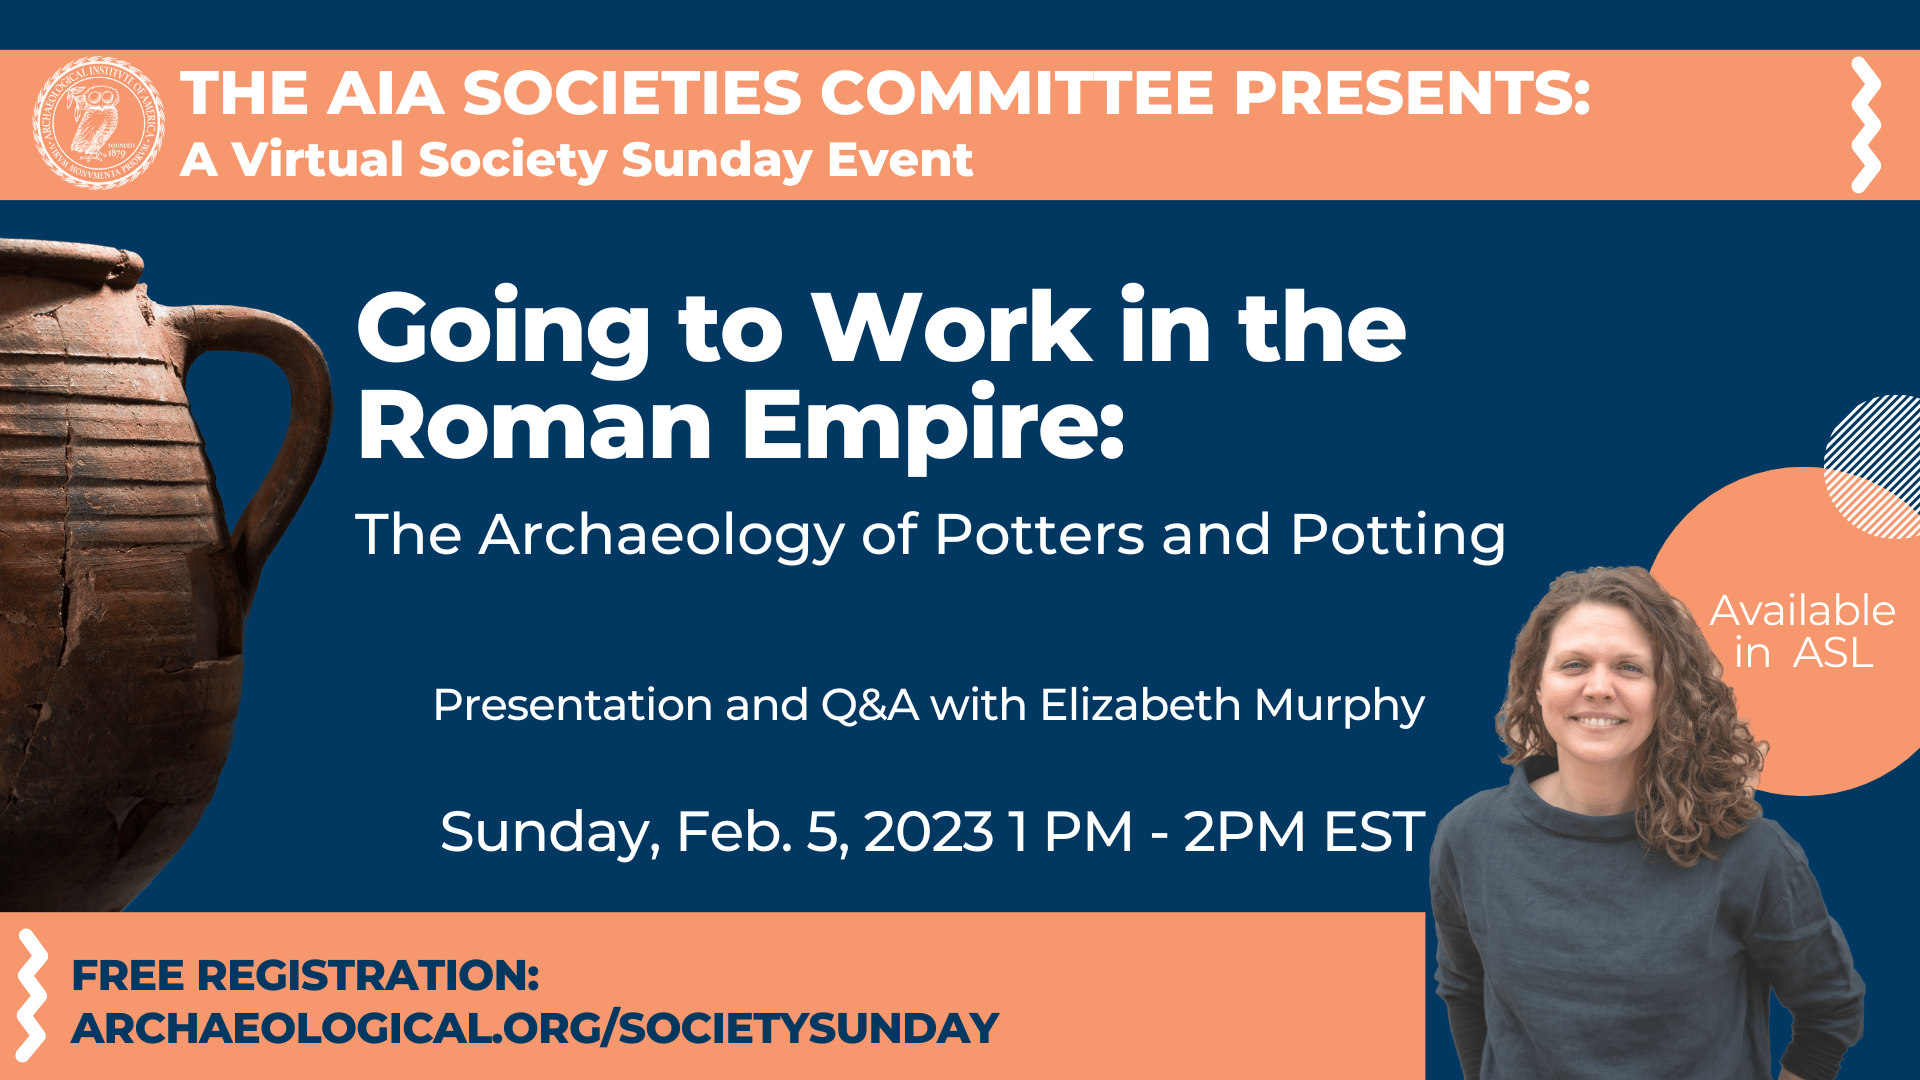 Dark blue and orange event poster for Going to Work in the Roman Empire: The Archaeology of Potters and Potting. Presenation and Q&A with Elizabeth Murphy. Sunday, Feb. 5, 2023 1pm-2pm EST. Free registration: archaeological.org/societysunday. Available in ASL.